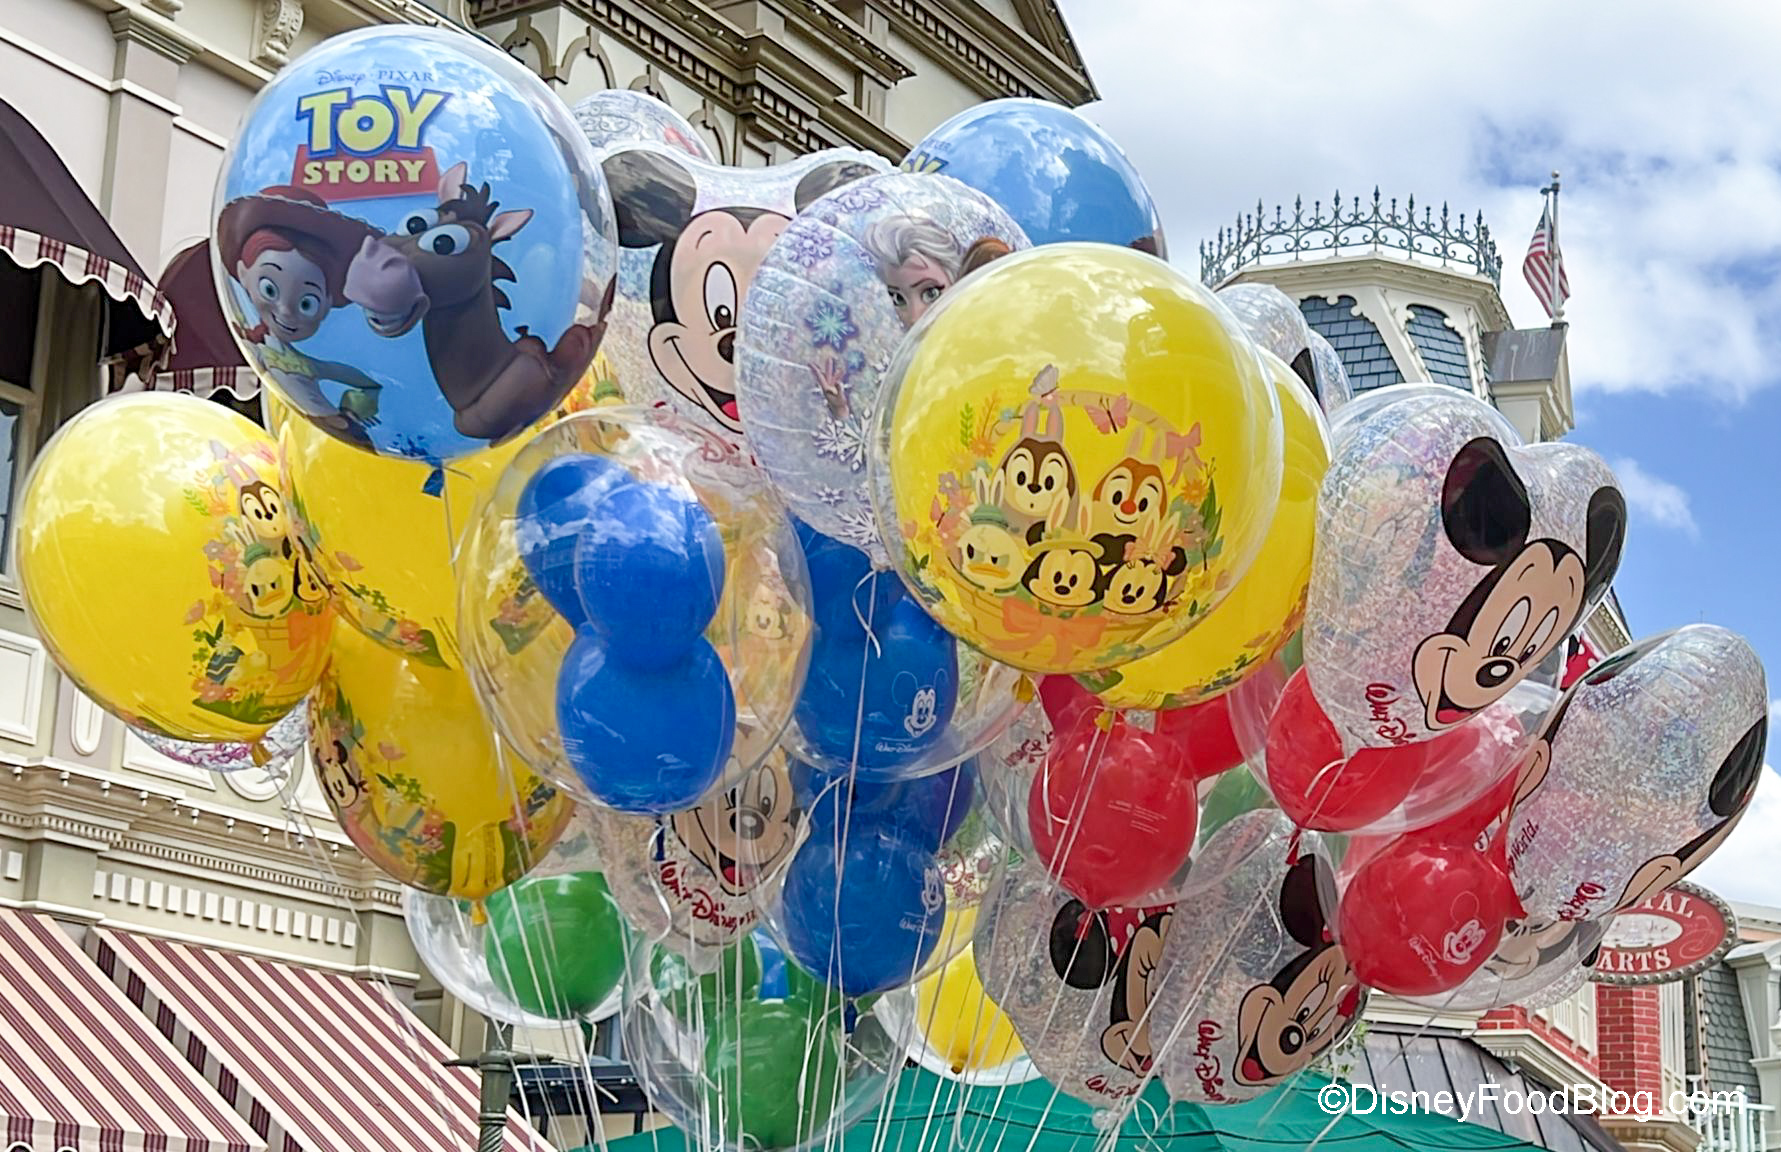 Did We Just Find the Most ADORABLE Disney World Balloon?